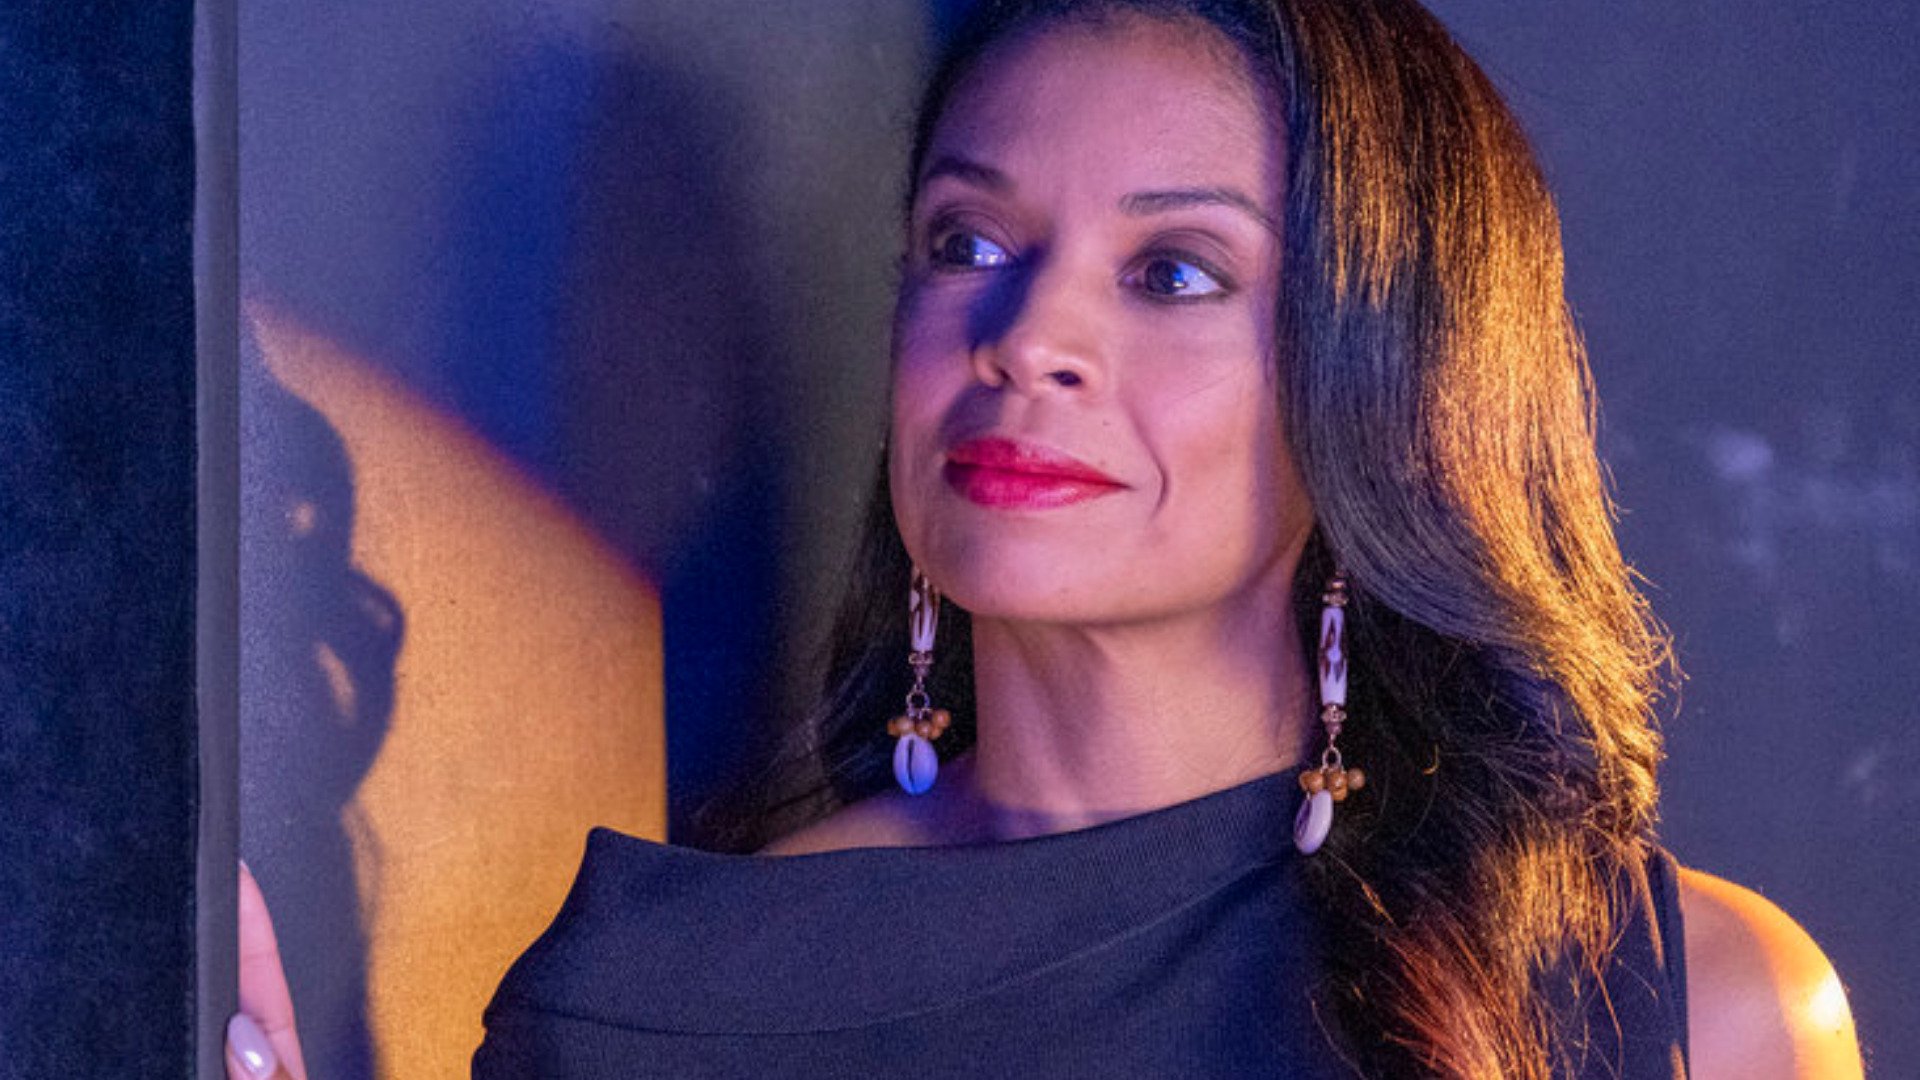 ‘This Is Us’ Season 6 Episode 6 Recap: Beth’s Legacy, Kate and Kevin’s Lesson, Rebecca and Miguel’s Romance in ‘Our Little Island Girl: Part Two’